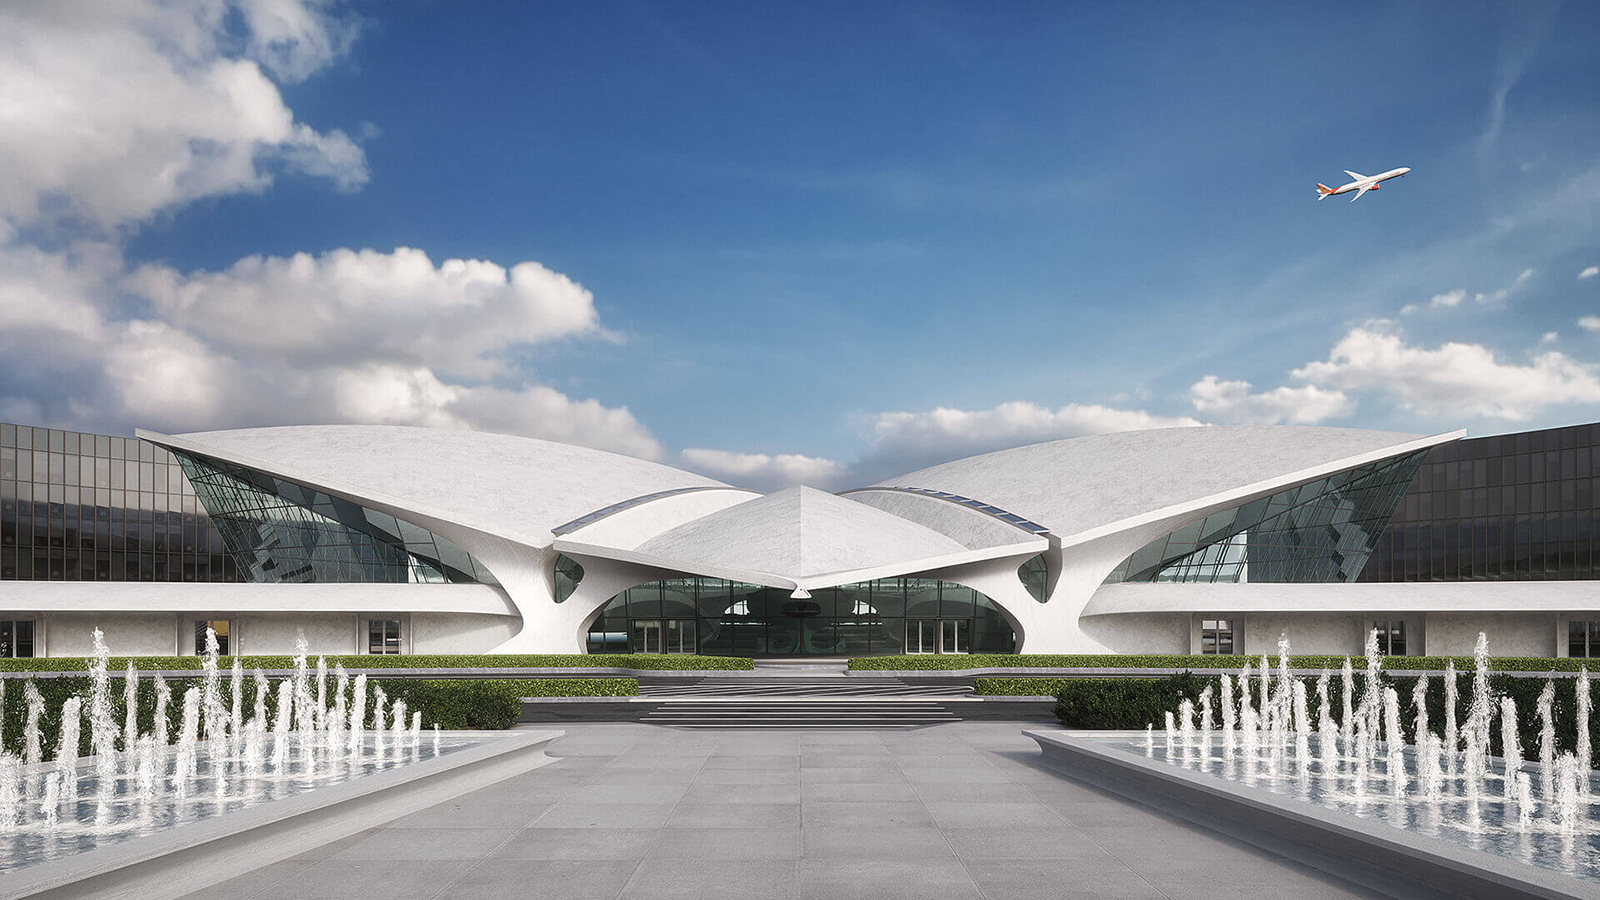 10 hotly anticipated hotels opening in 2019: TWA Flight Centre hotel at JFK Airport